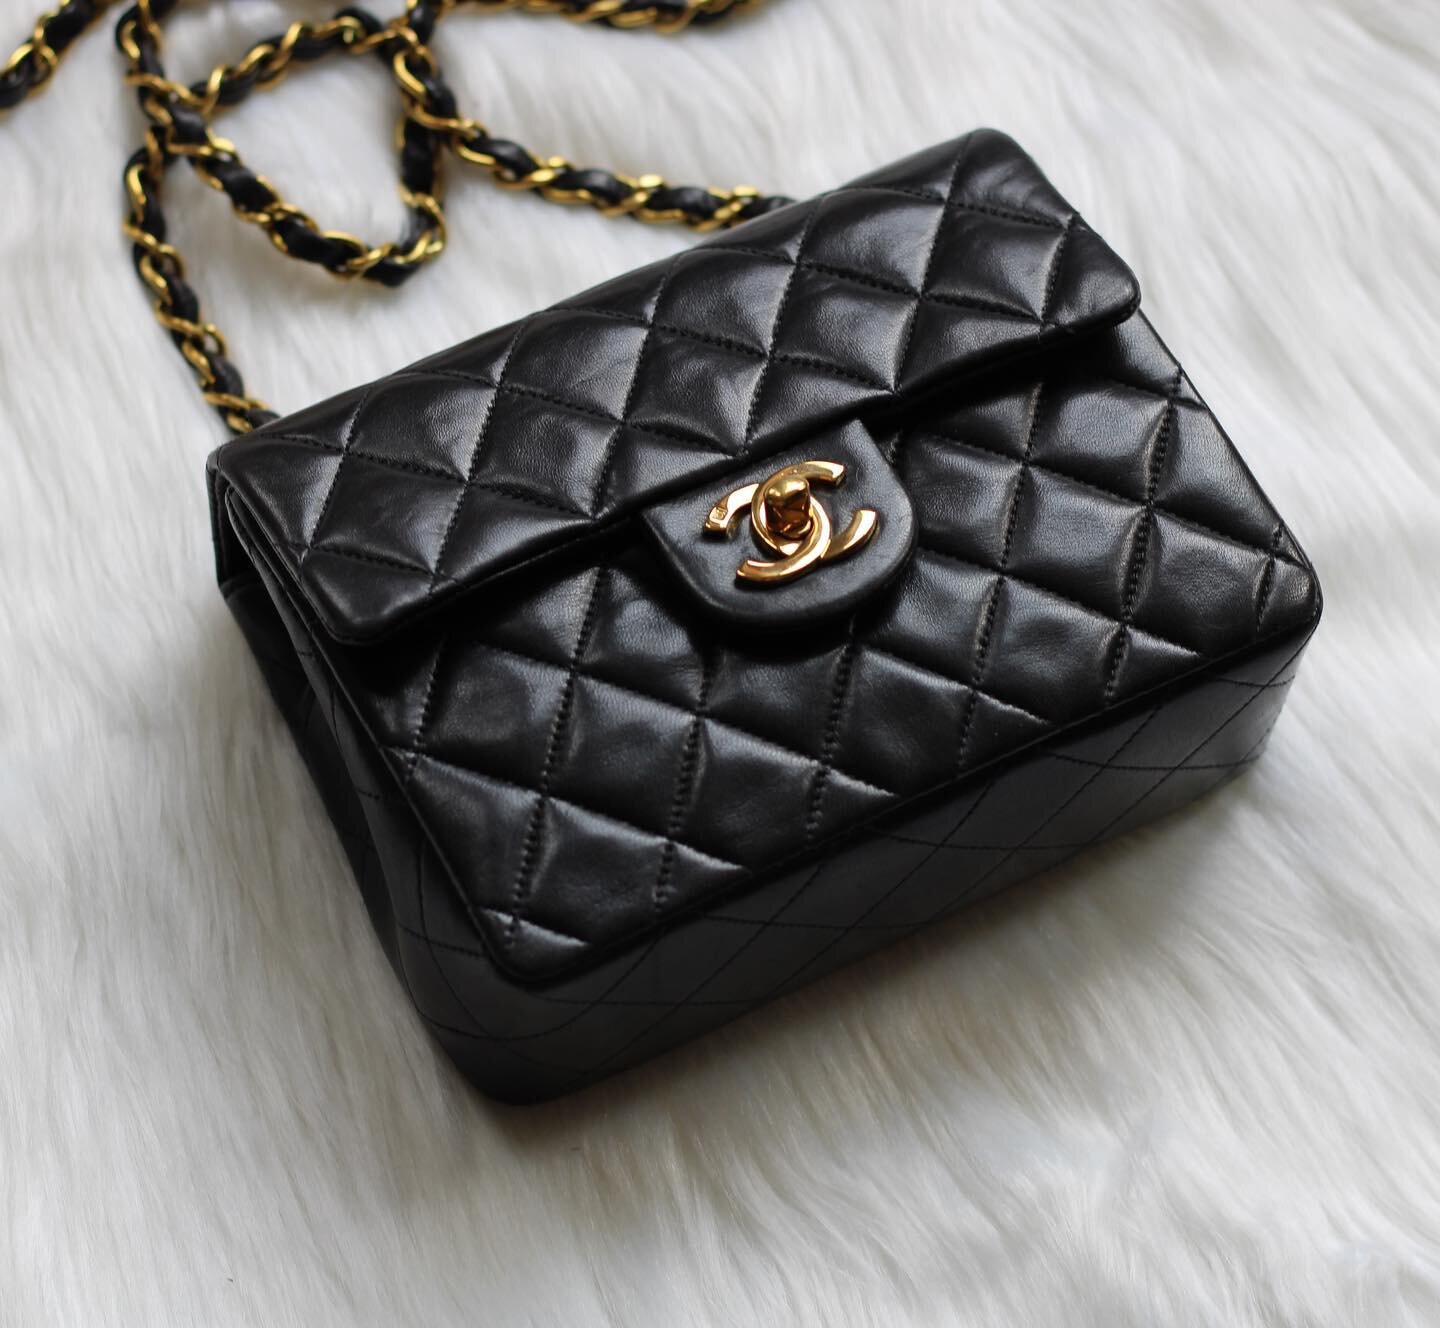 [NEW AVAILABLE] What&rsquo;s cute, puffy, &amp; shiny all around? This girl 🥳

Vintage Black Lambskin Mini Square (17 cm) 🖤

🌿 PRICE: $4149 + ship! 🤍✨

✔️INCLUSIONS: Hologram, Authenticity Card, &amp; Dustbag

▪️1 series. Pristine Original Vintag